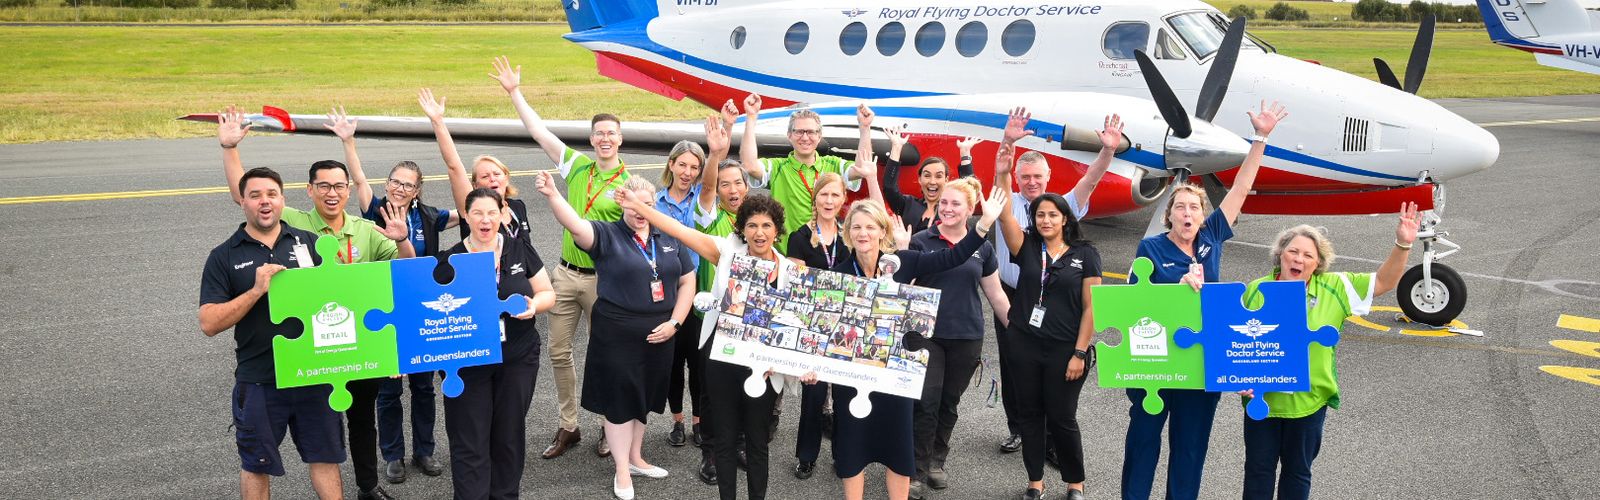 $18m worth of life-saving support for the Flying Doctor